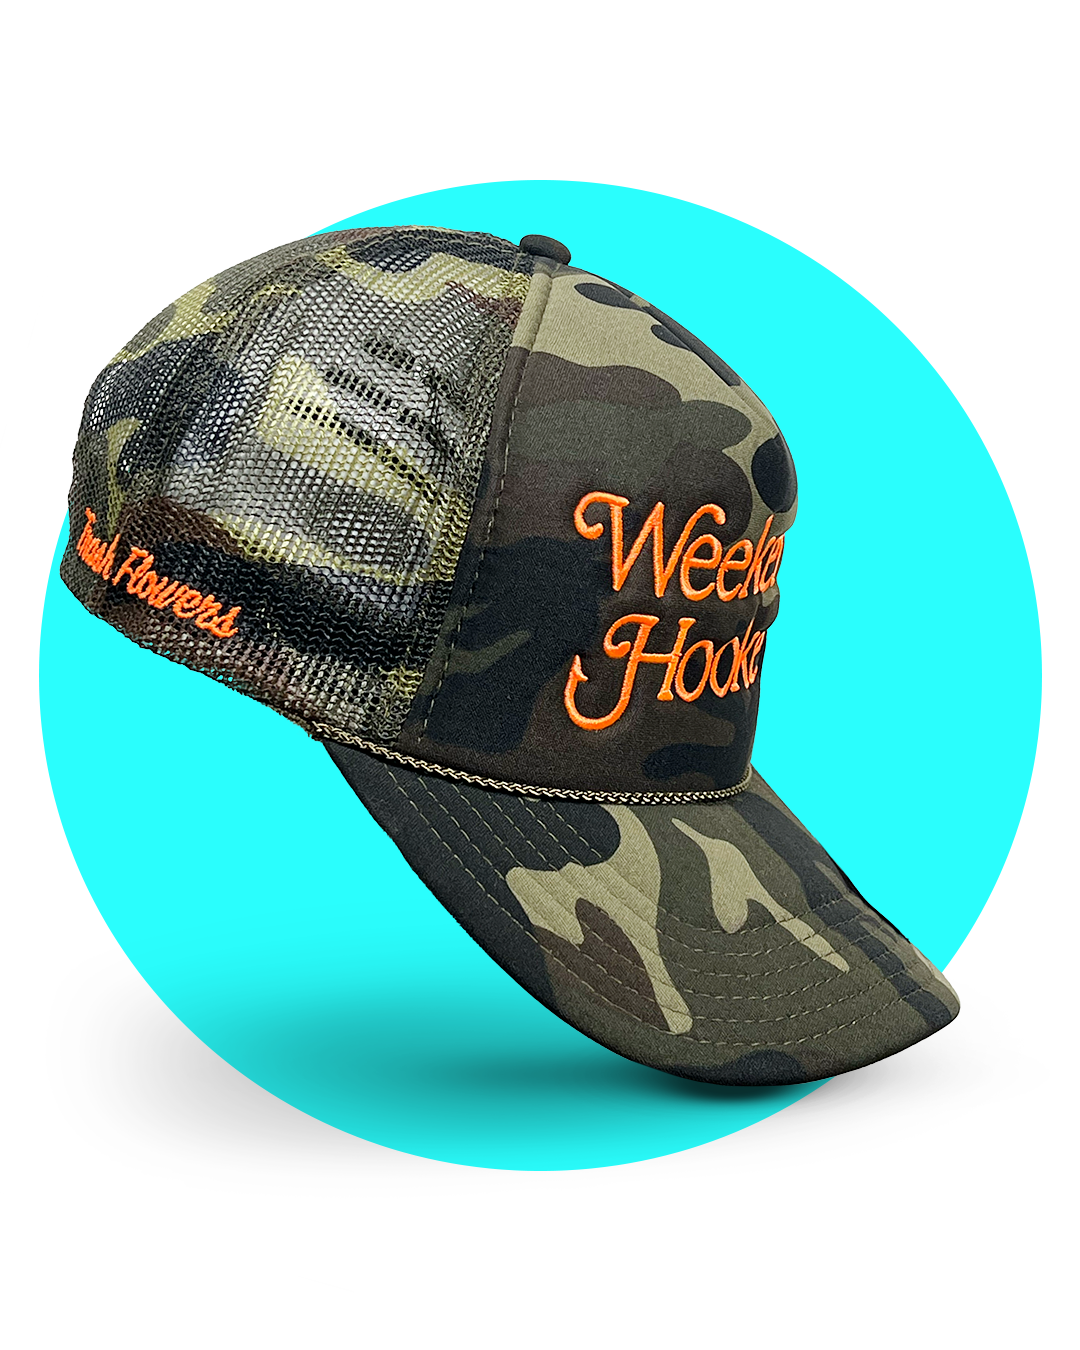 Limited Edition Embroidered Weekend Hooker Trucker Hat